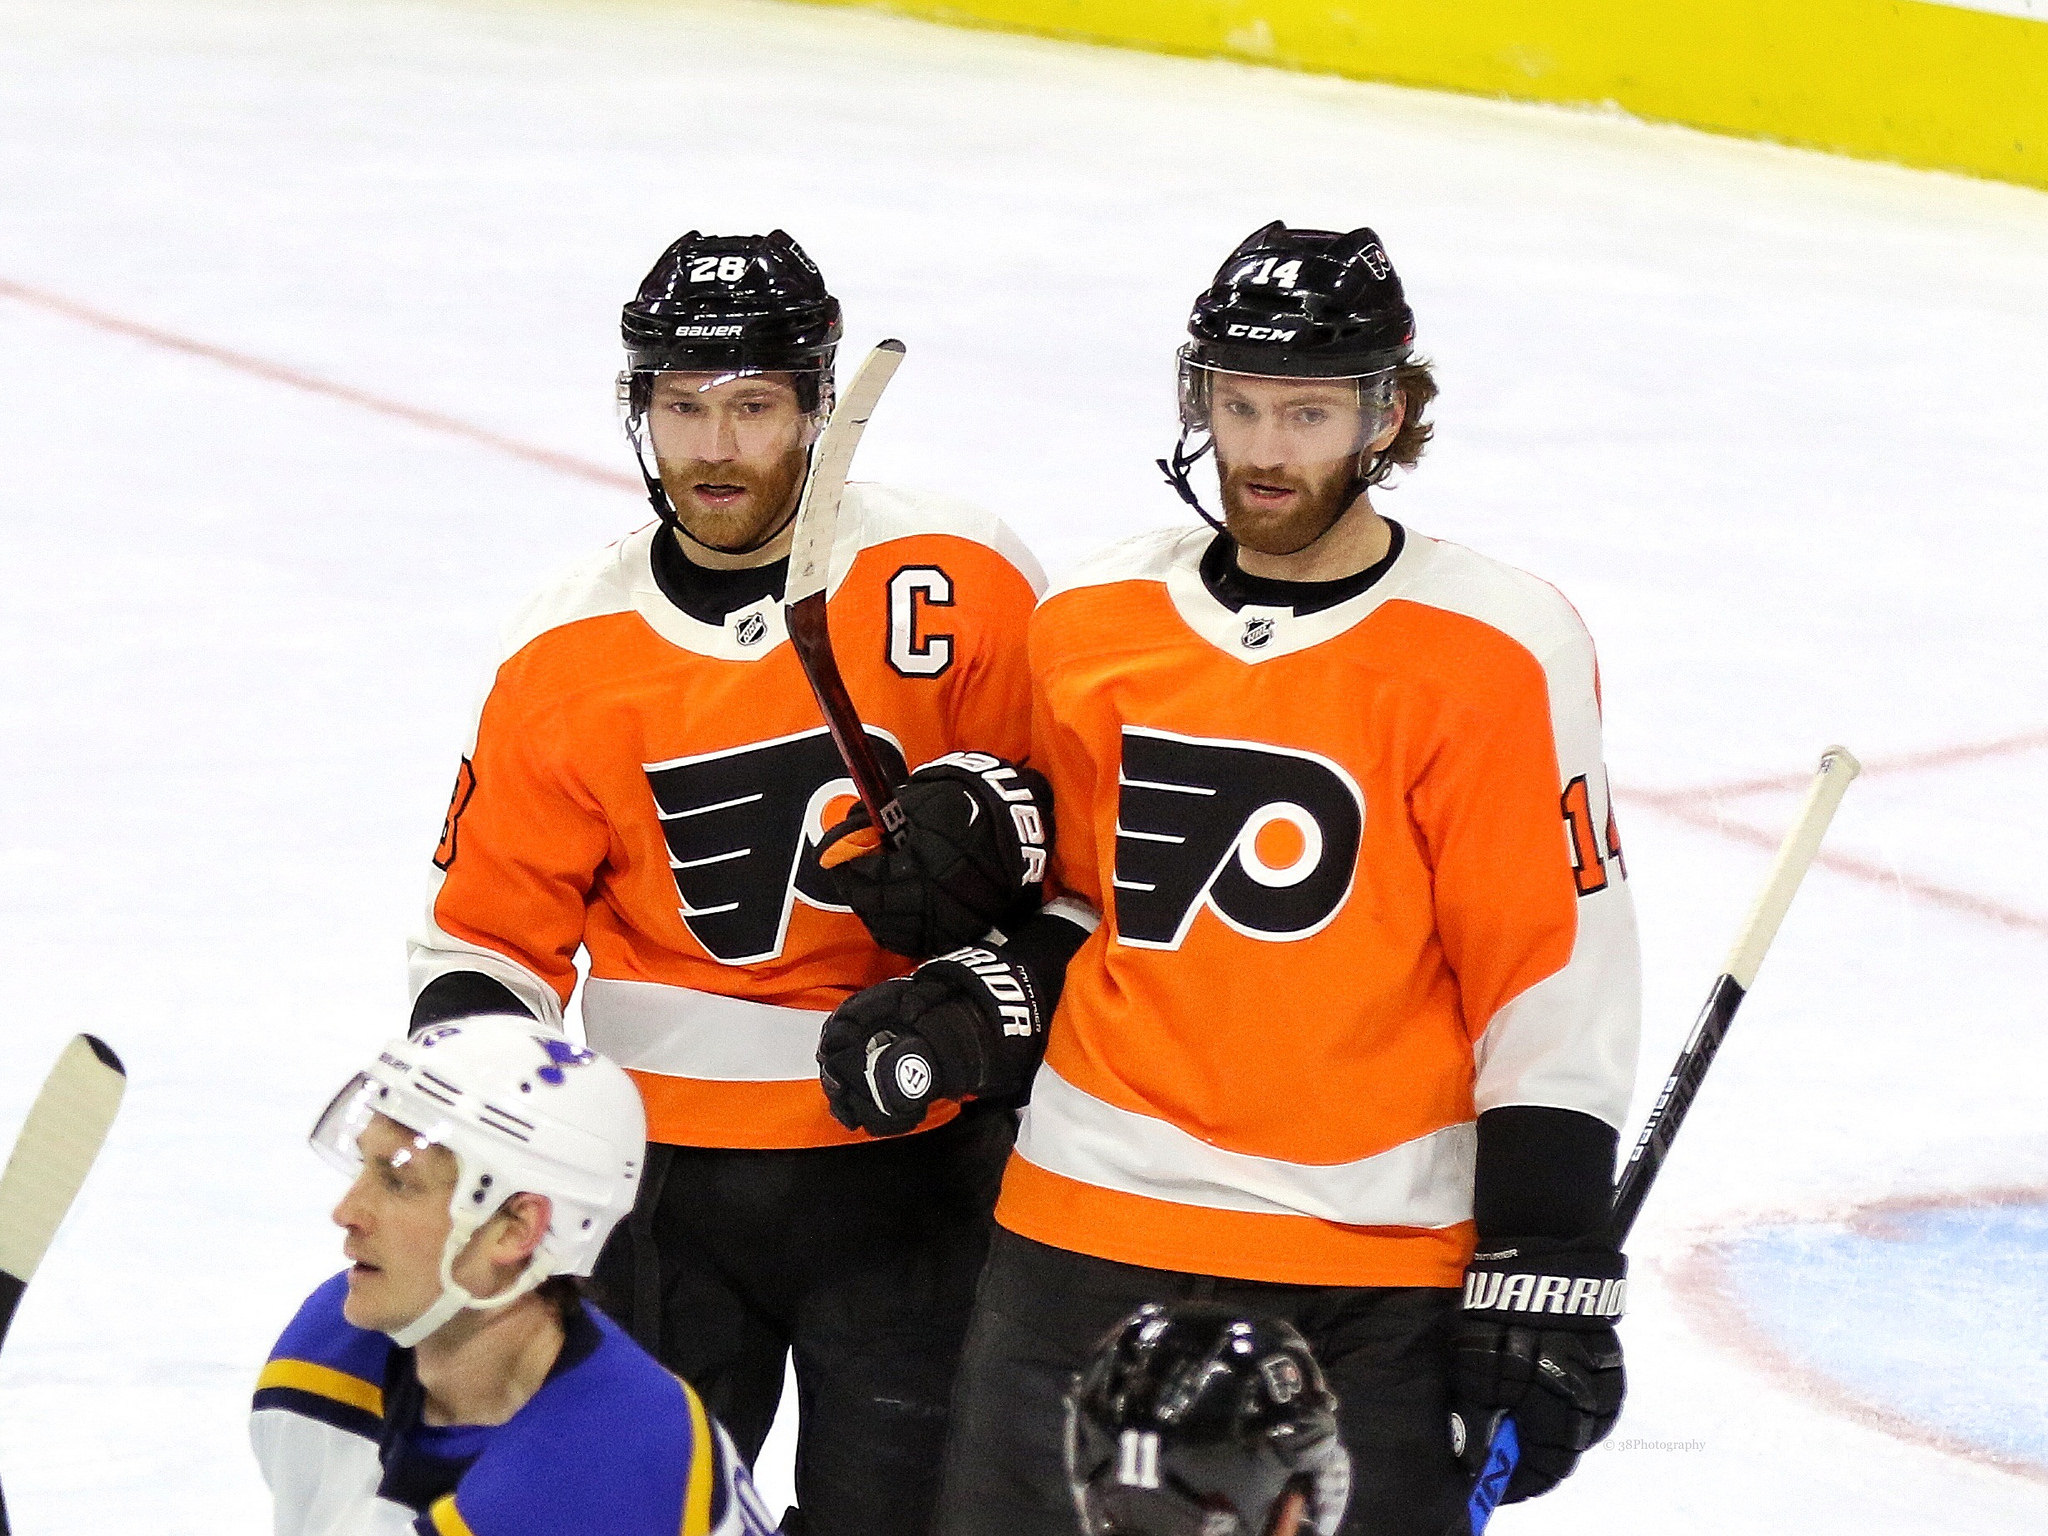 Flyers' Giroux Has Options to Consider as He Enters Contract Year